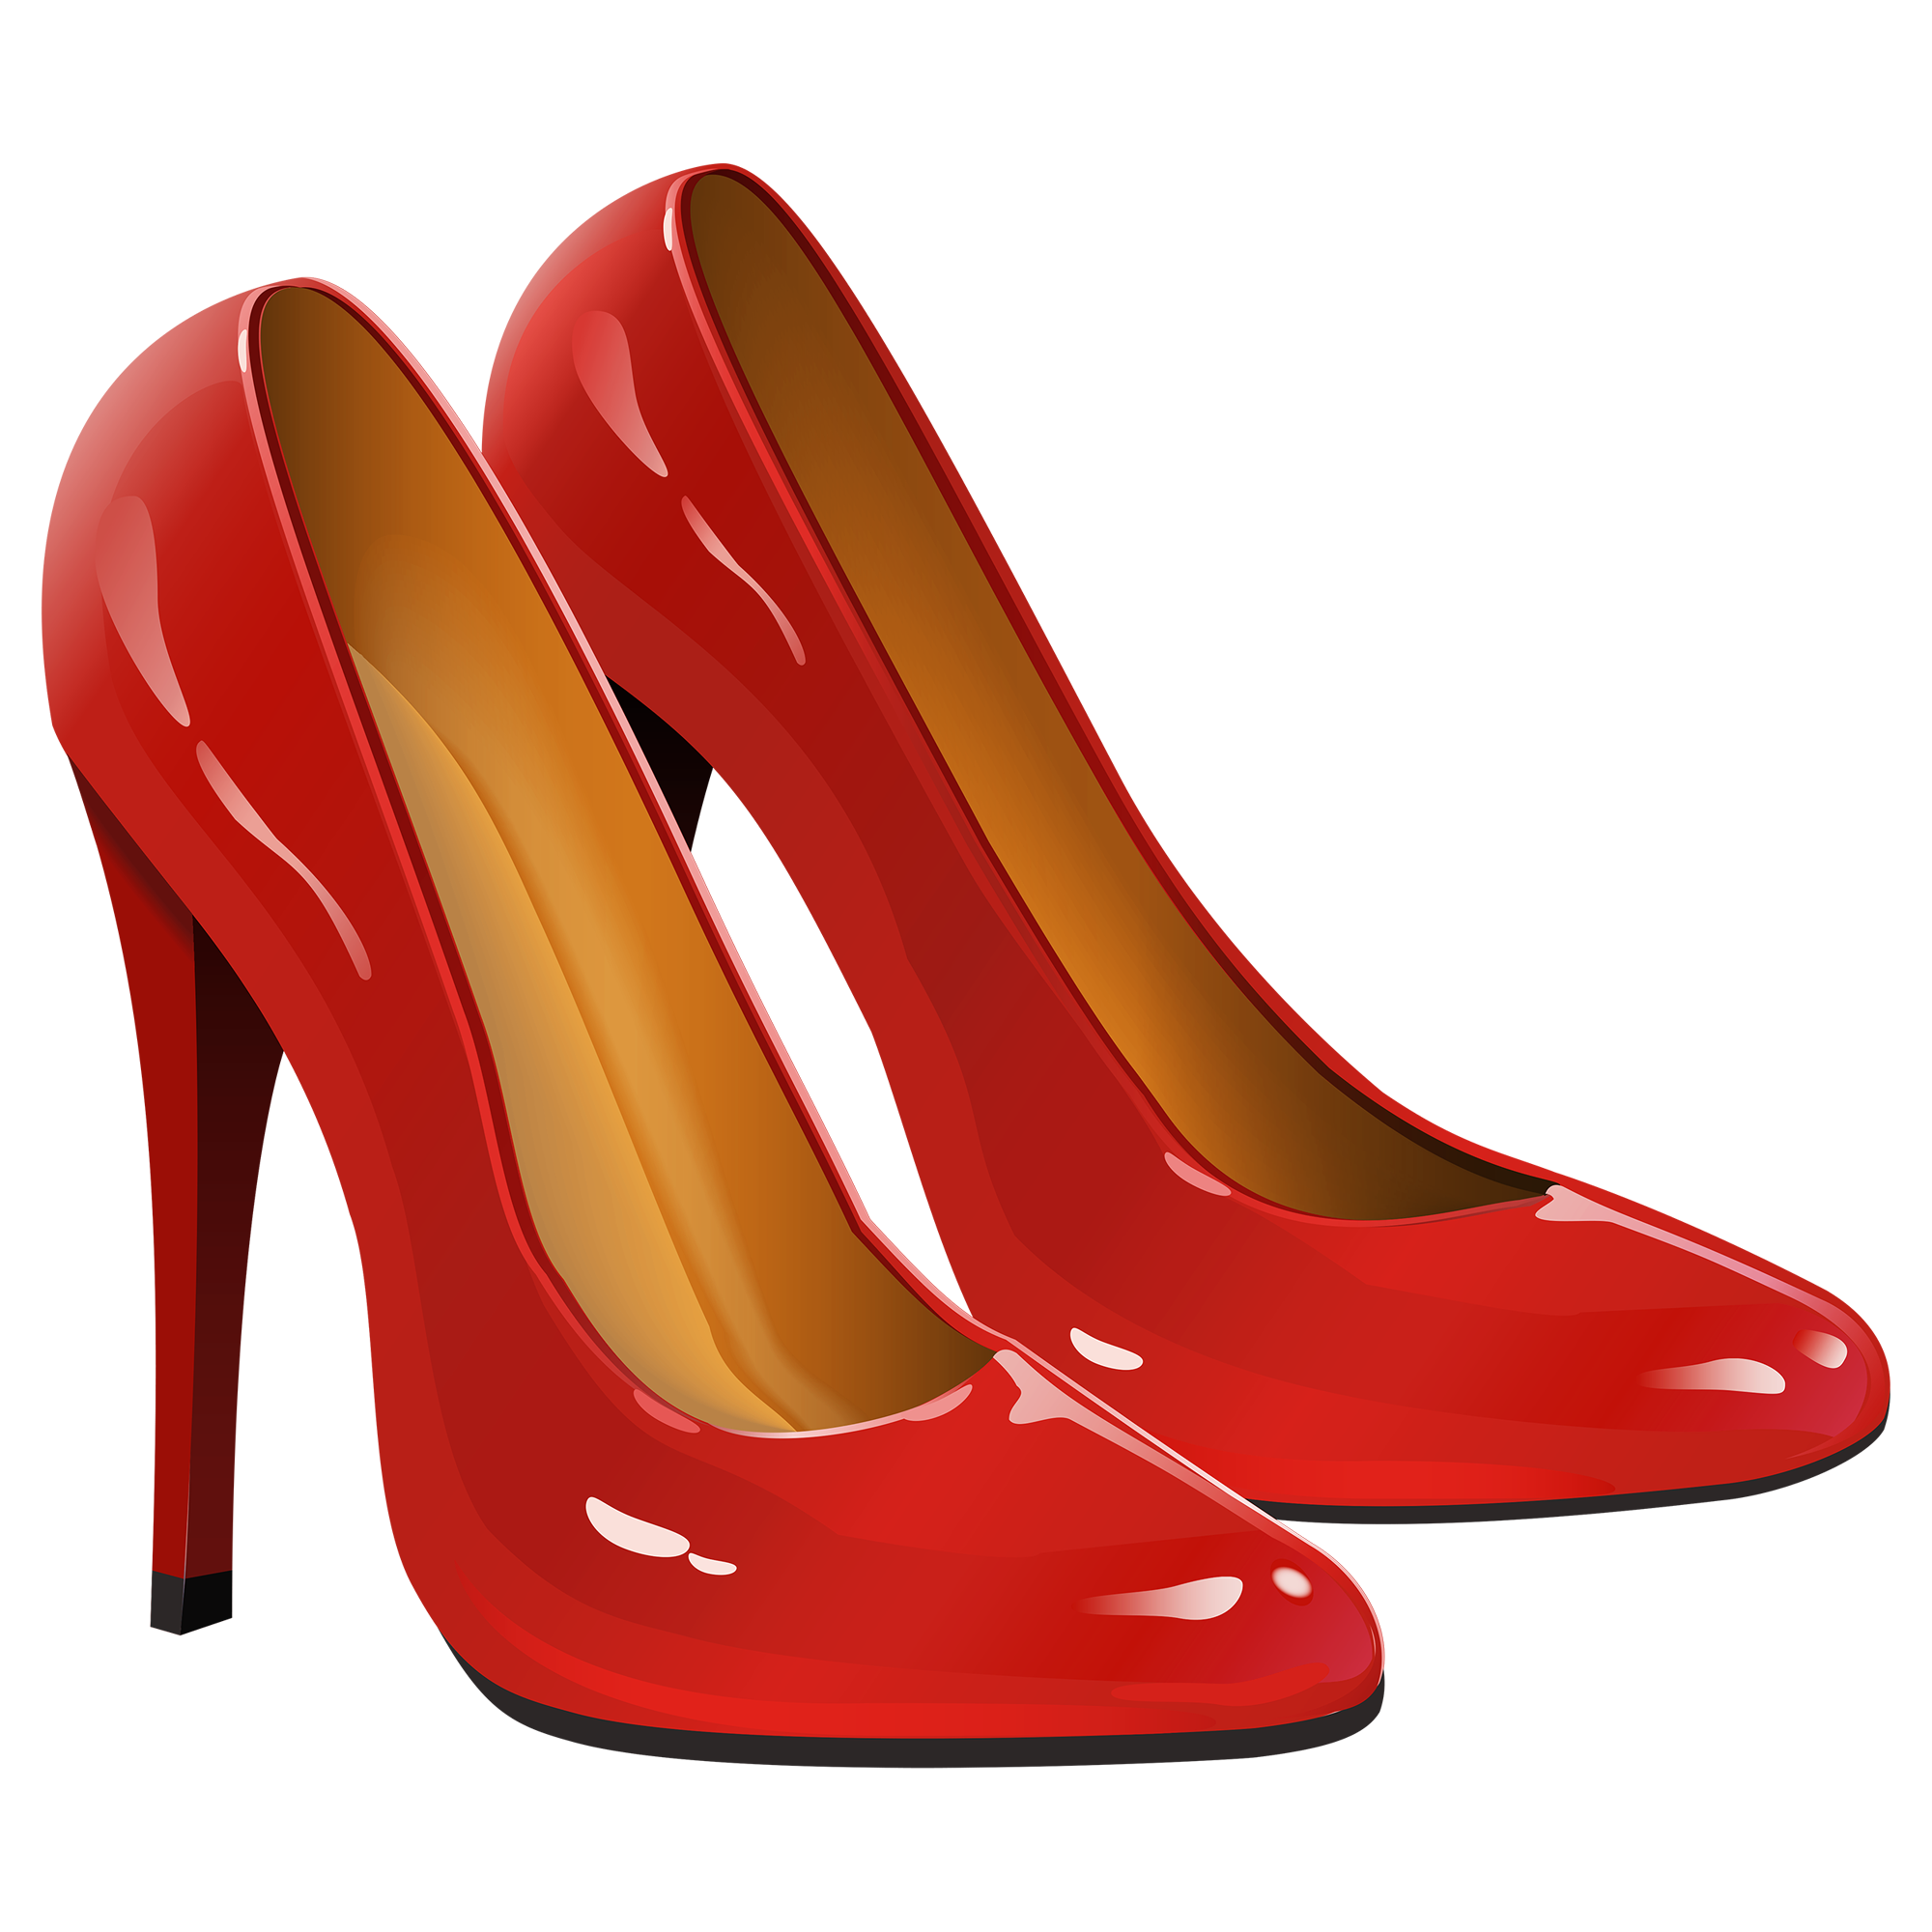 Red Women Shoes Transparent Picture